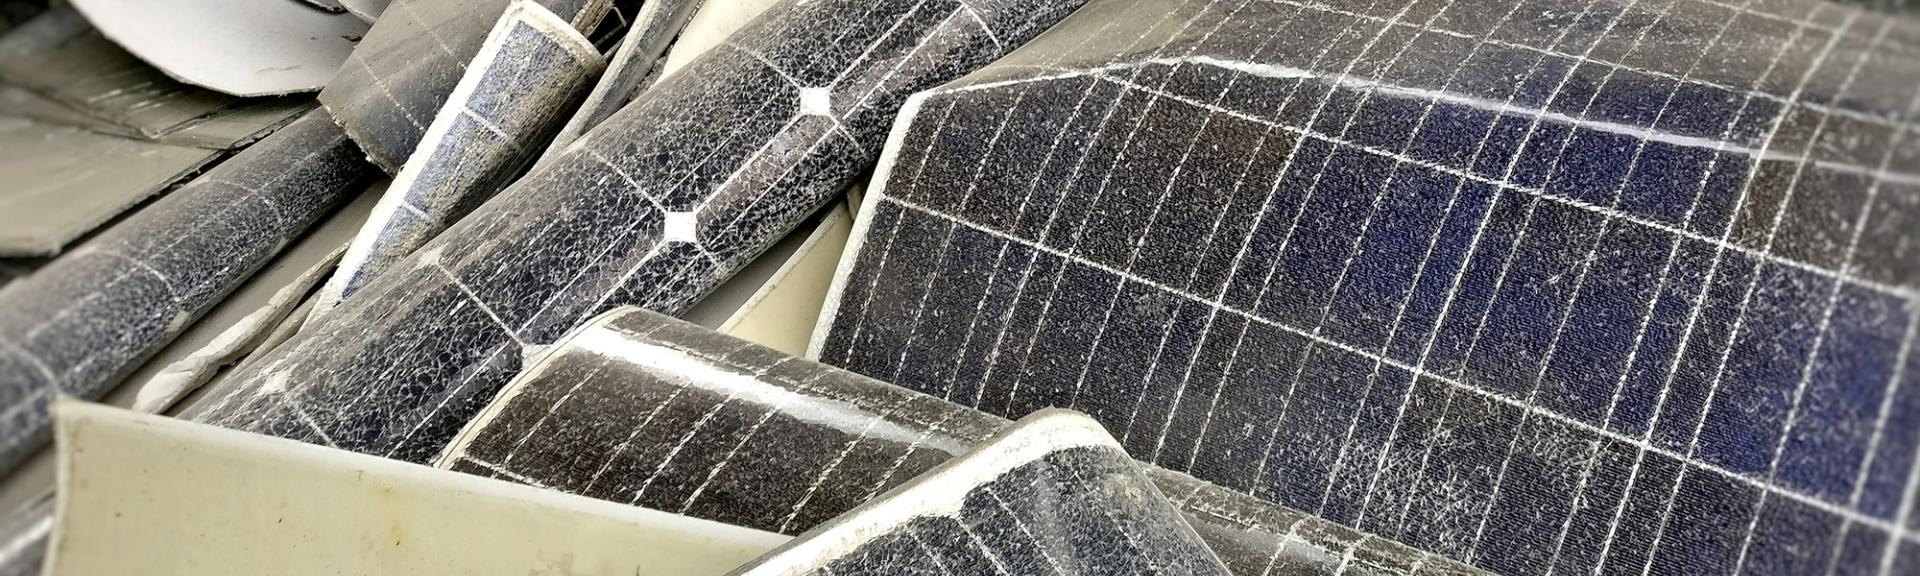 PV modules after the initial treatment